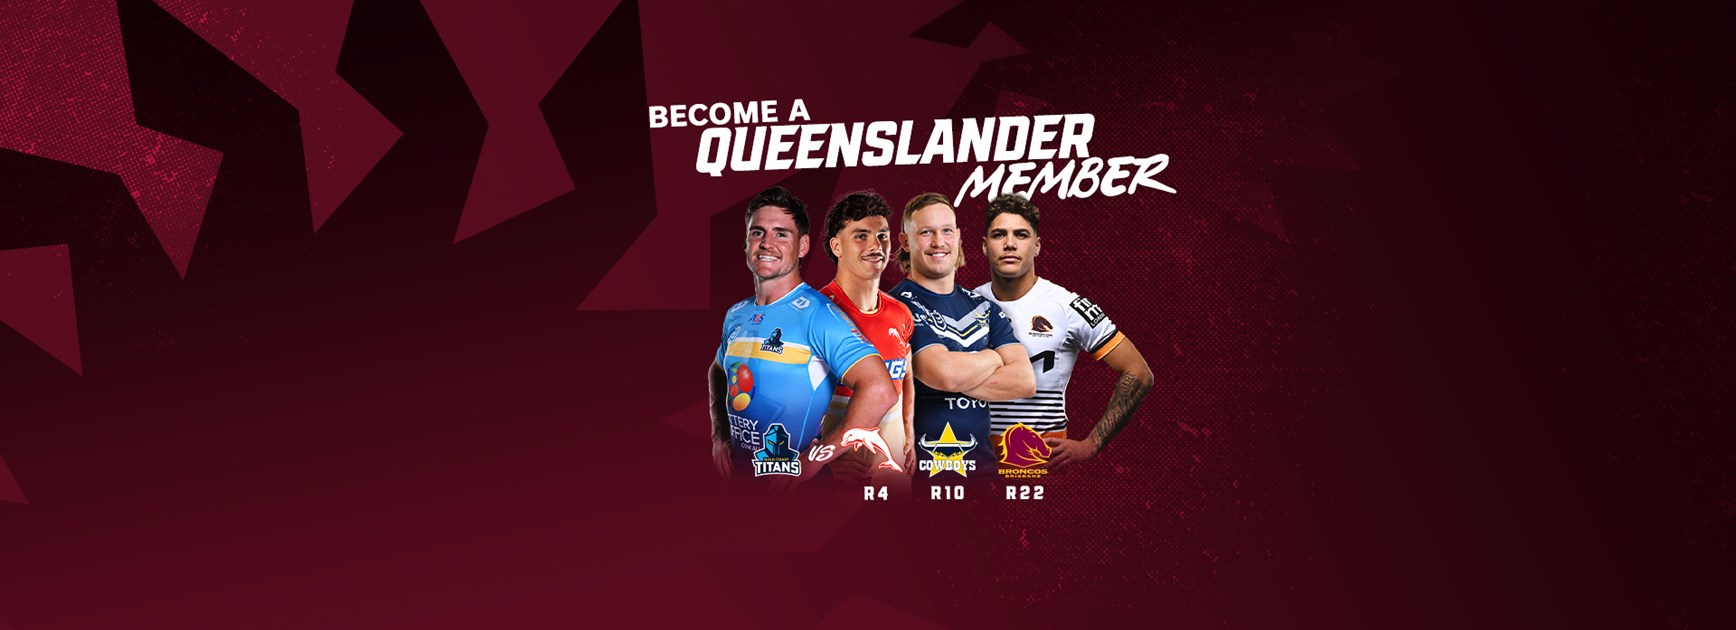 See every Queensland derby on the Gold Coast this season with a QLDer Membership